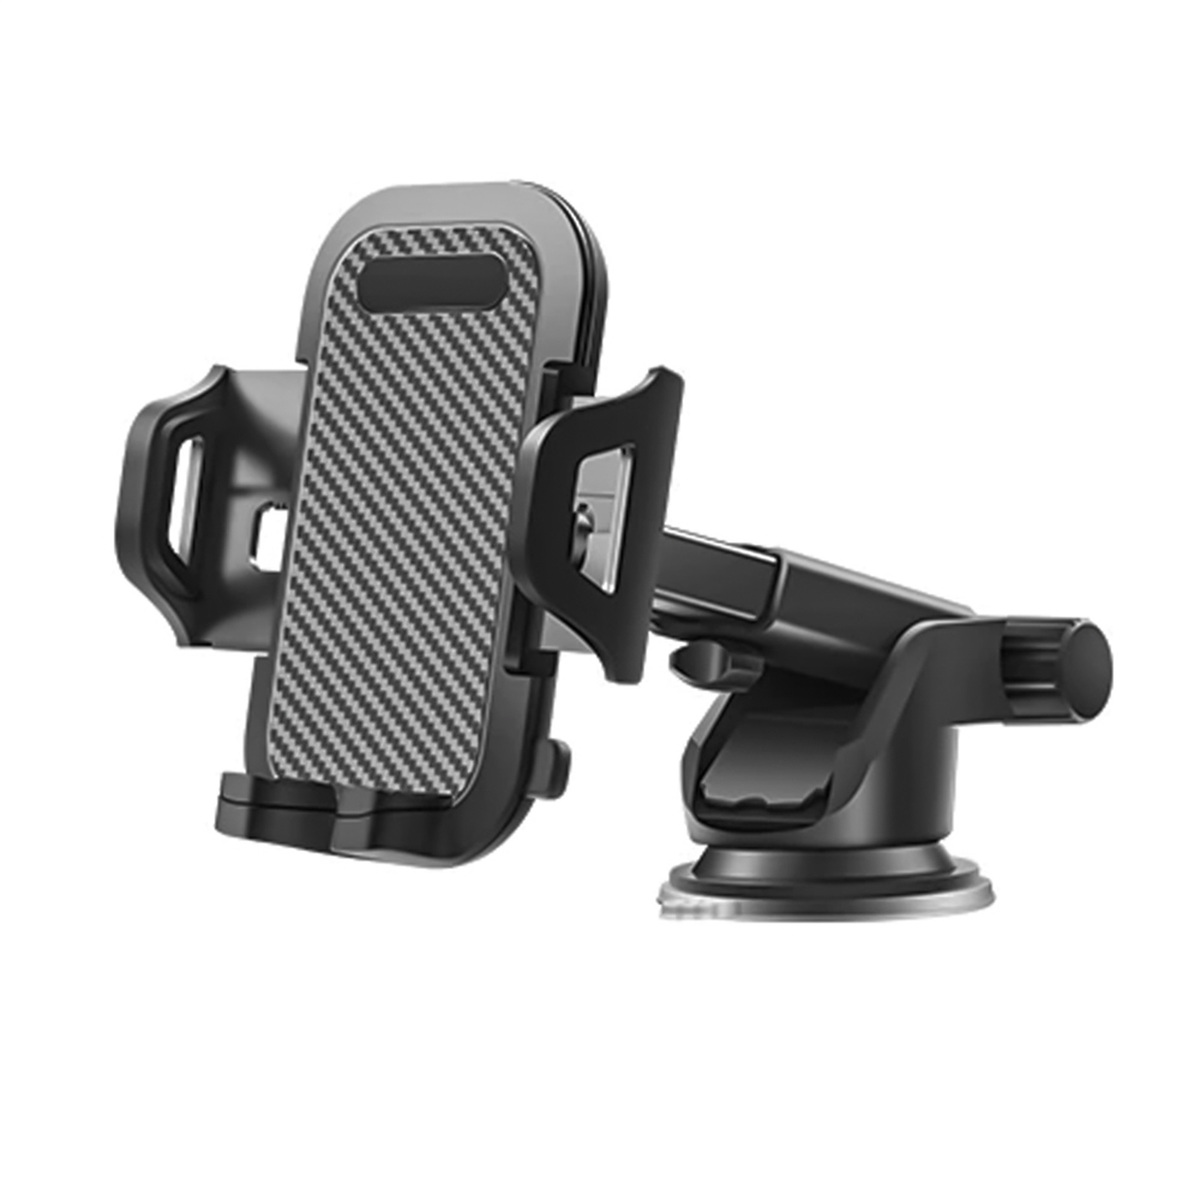 Trands 360° Rotatable Dashboard and Windshield Car Holder HO570